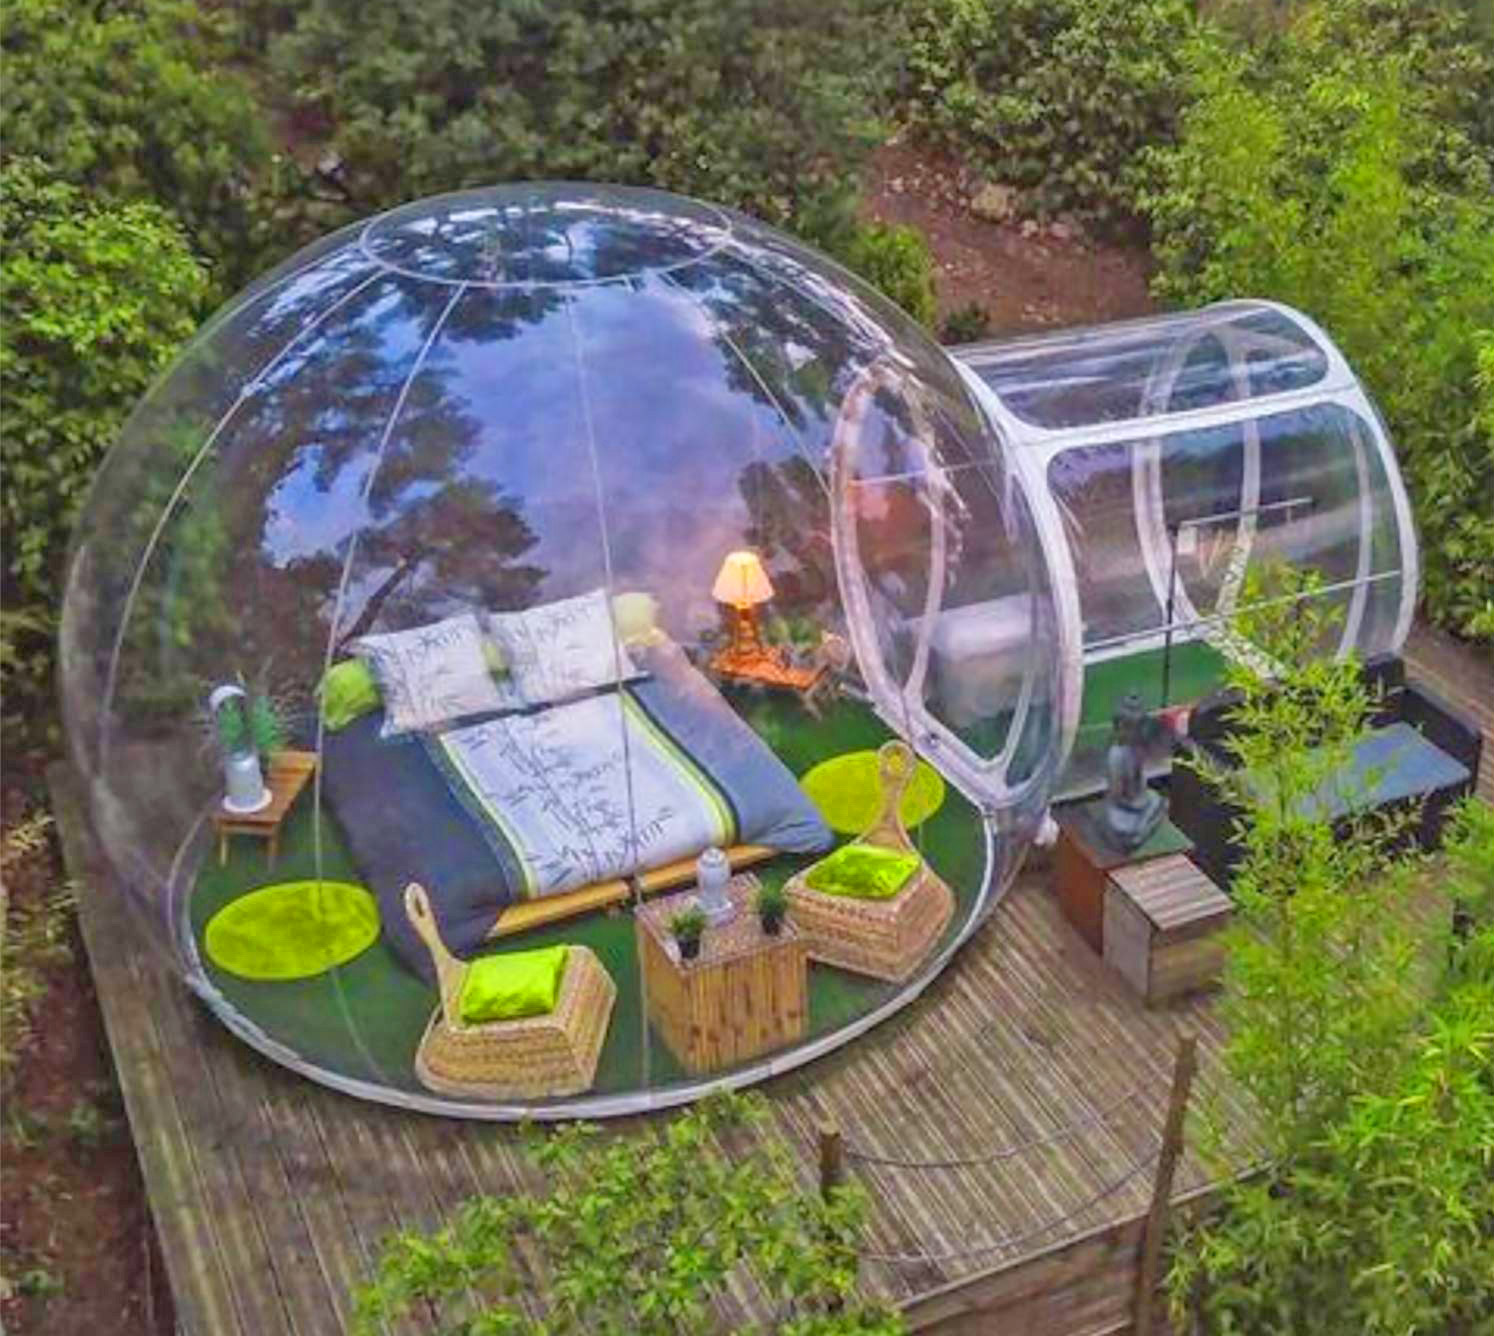 Transparent Bubble Tent Lets You View The Stars While Falling Asleep